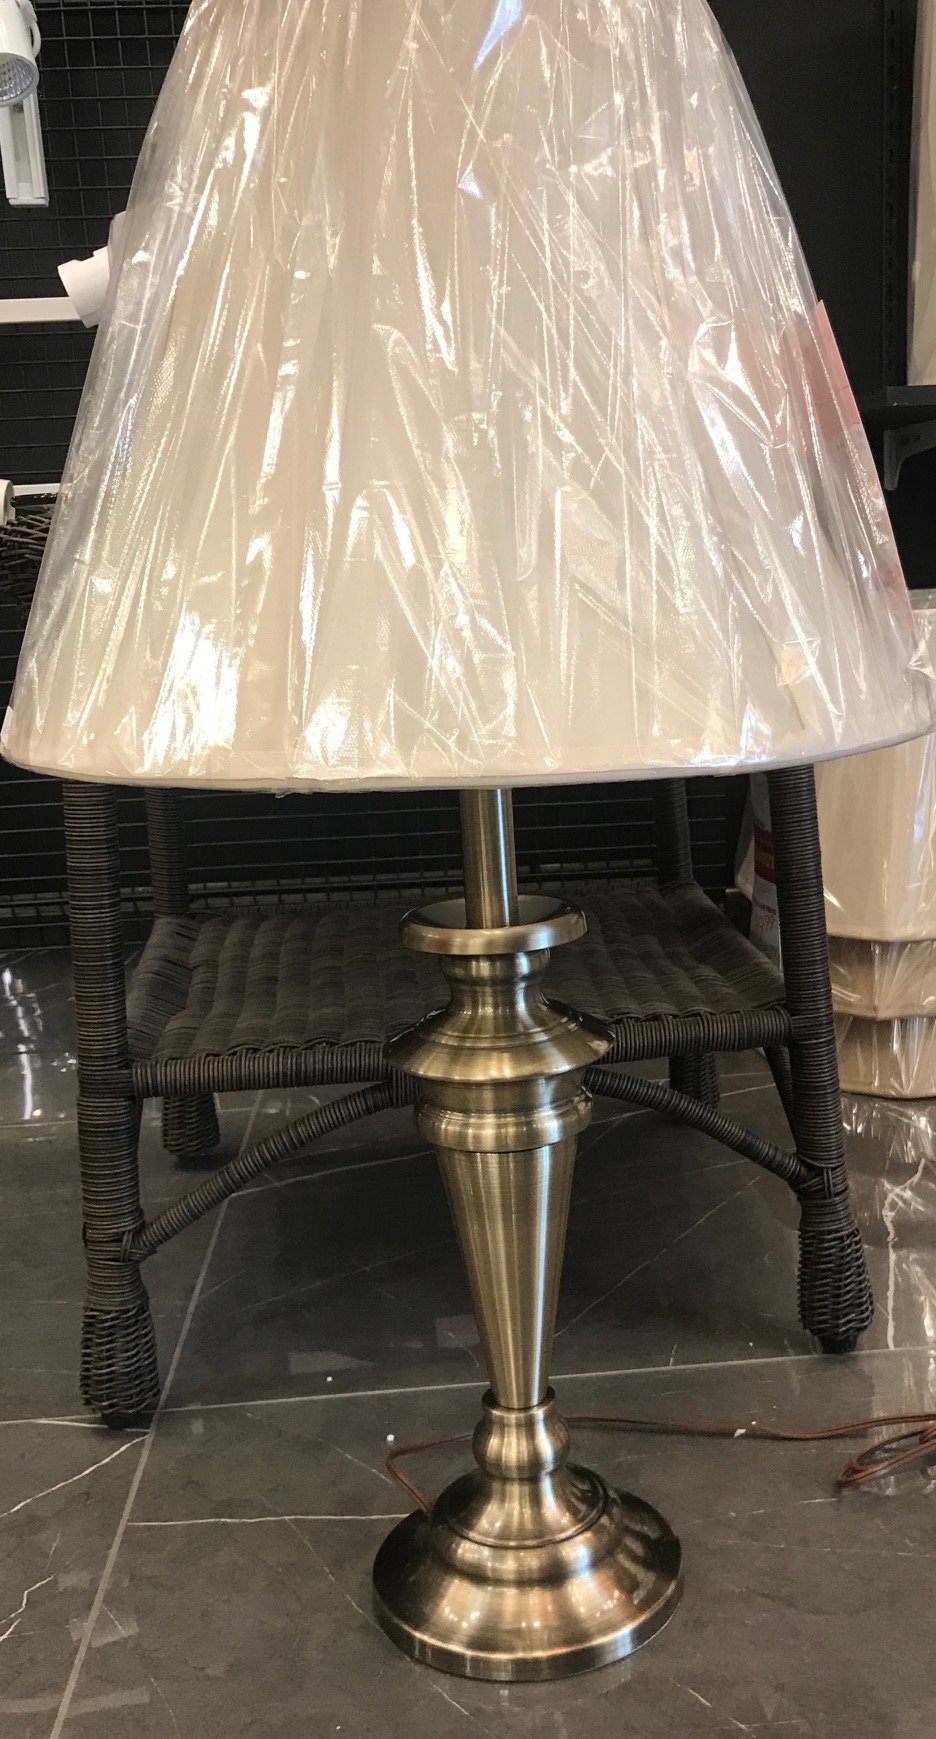 40190 Table Lamp
Made in Canada
Available in Antique Brass
or Brushed Chrome
Regular Price $236.99
Sale Price $165.99